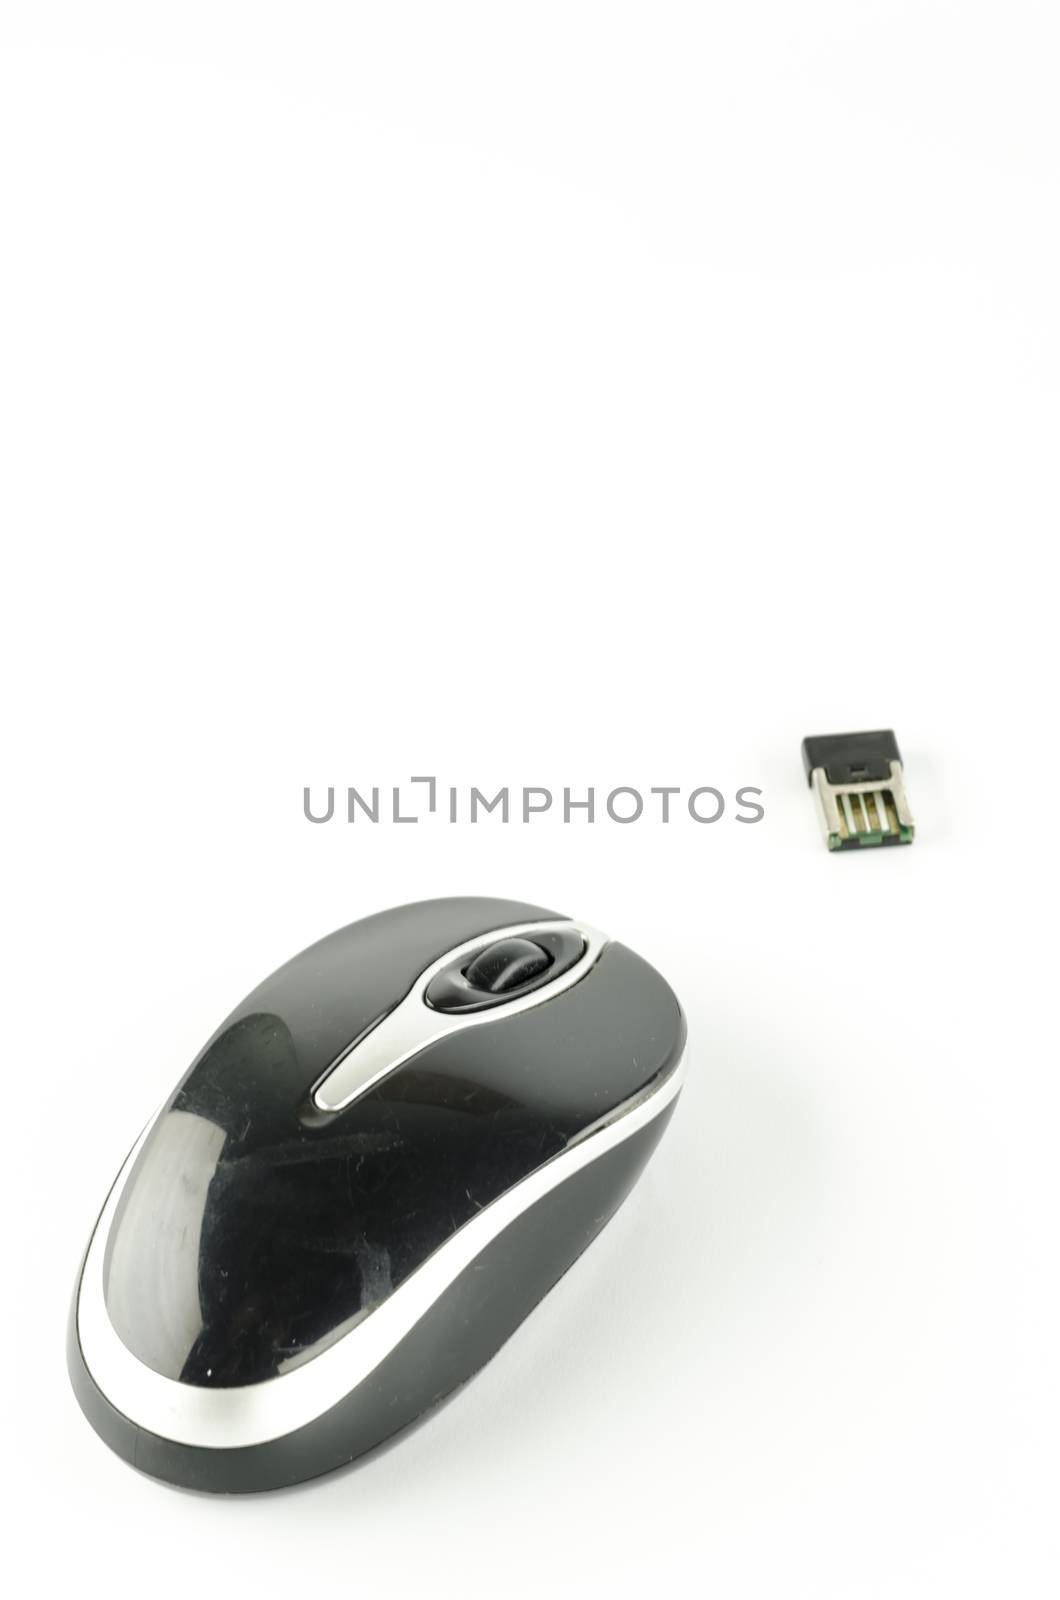 computer wireless mouse by ammza12